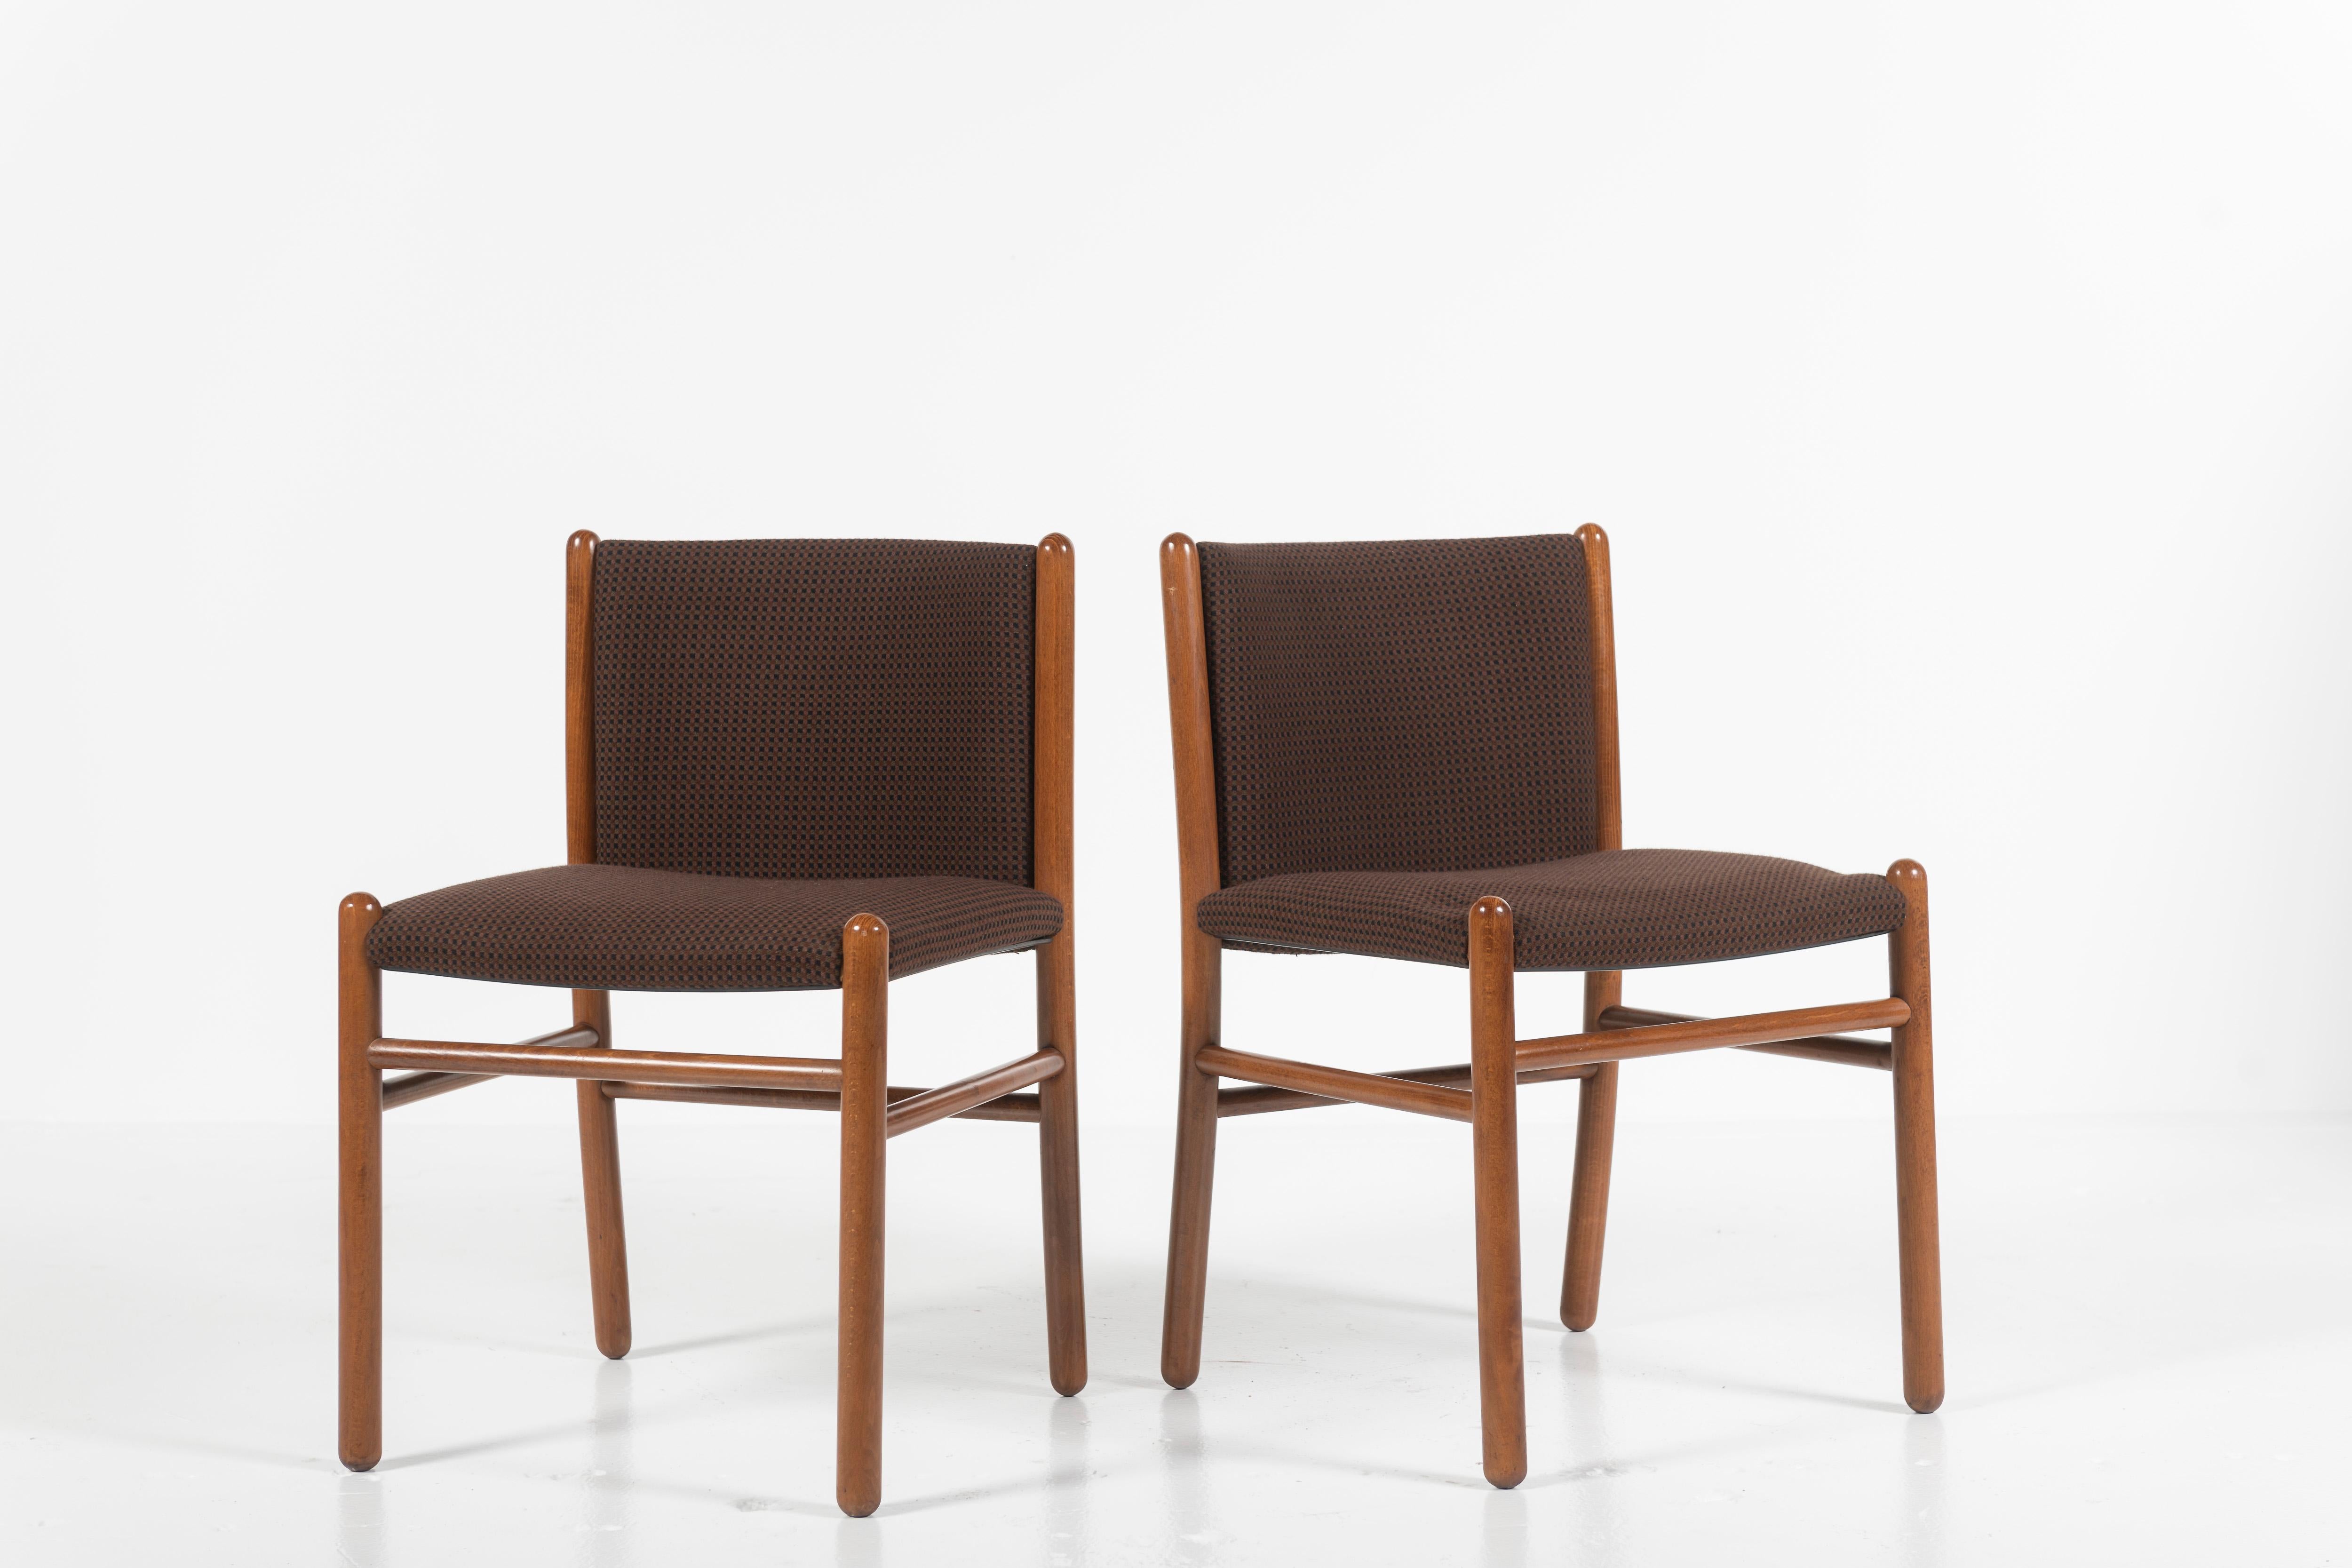 Upholstery Set of Four Mid-Century Modern Dining Chairs, Gianfranco Frattini, Italy, 1960s For Sale